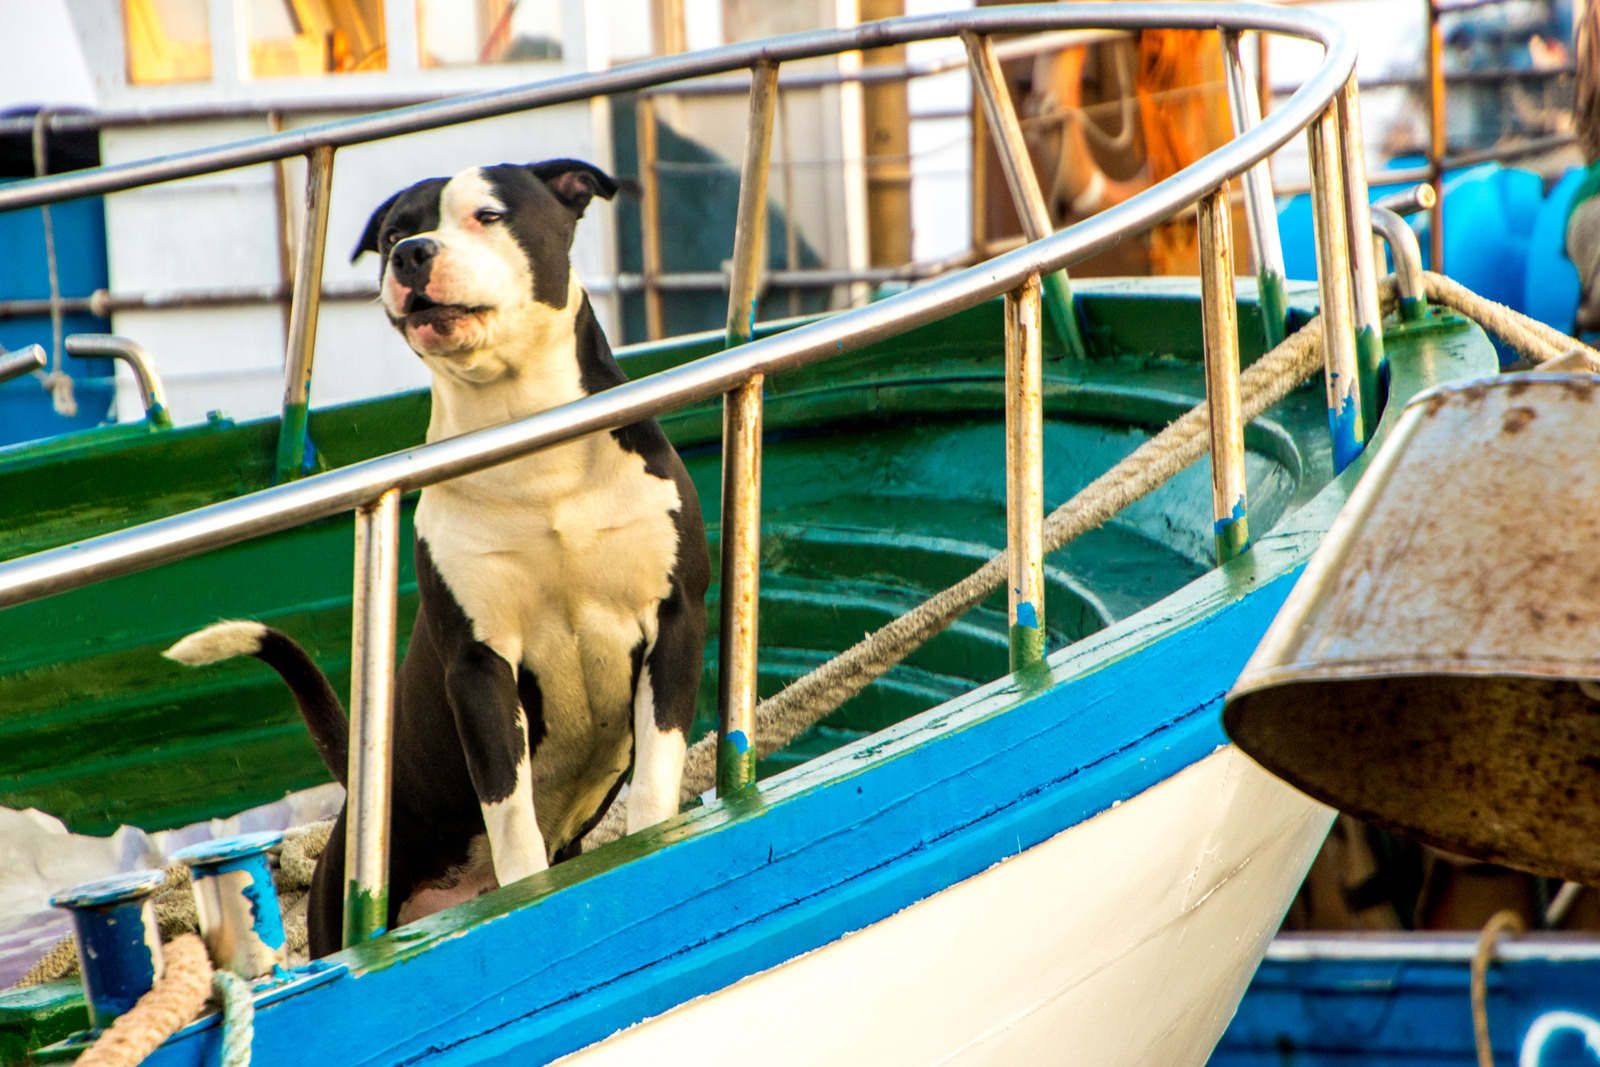 A large dog protecting it's owner's fishing boat.